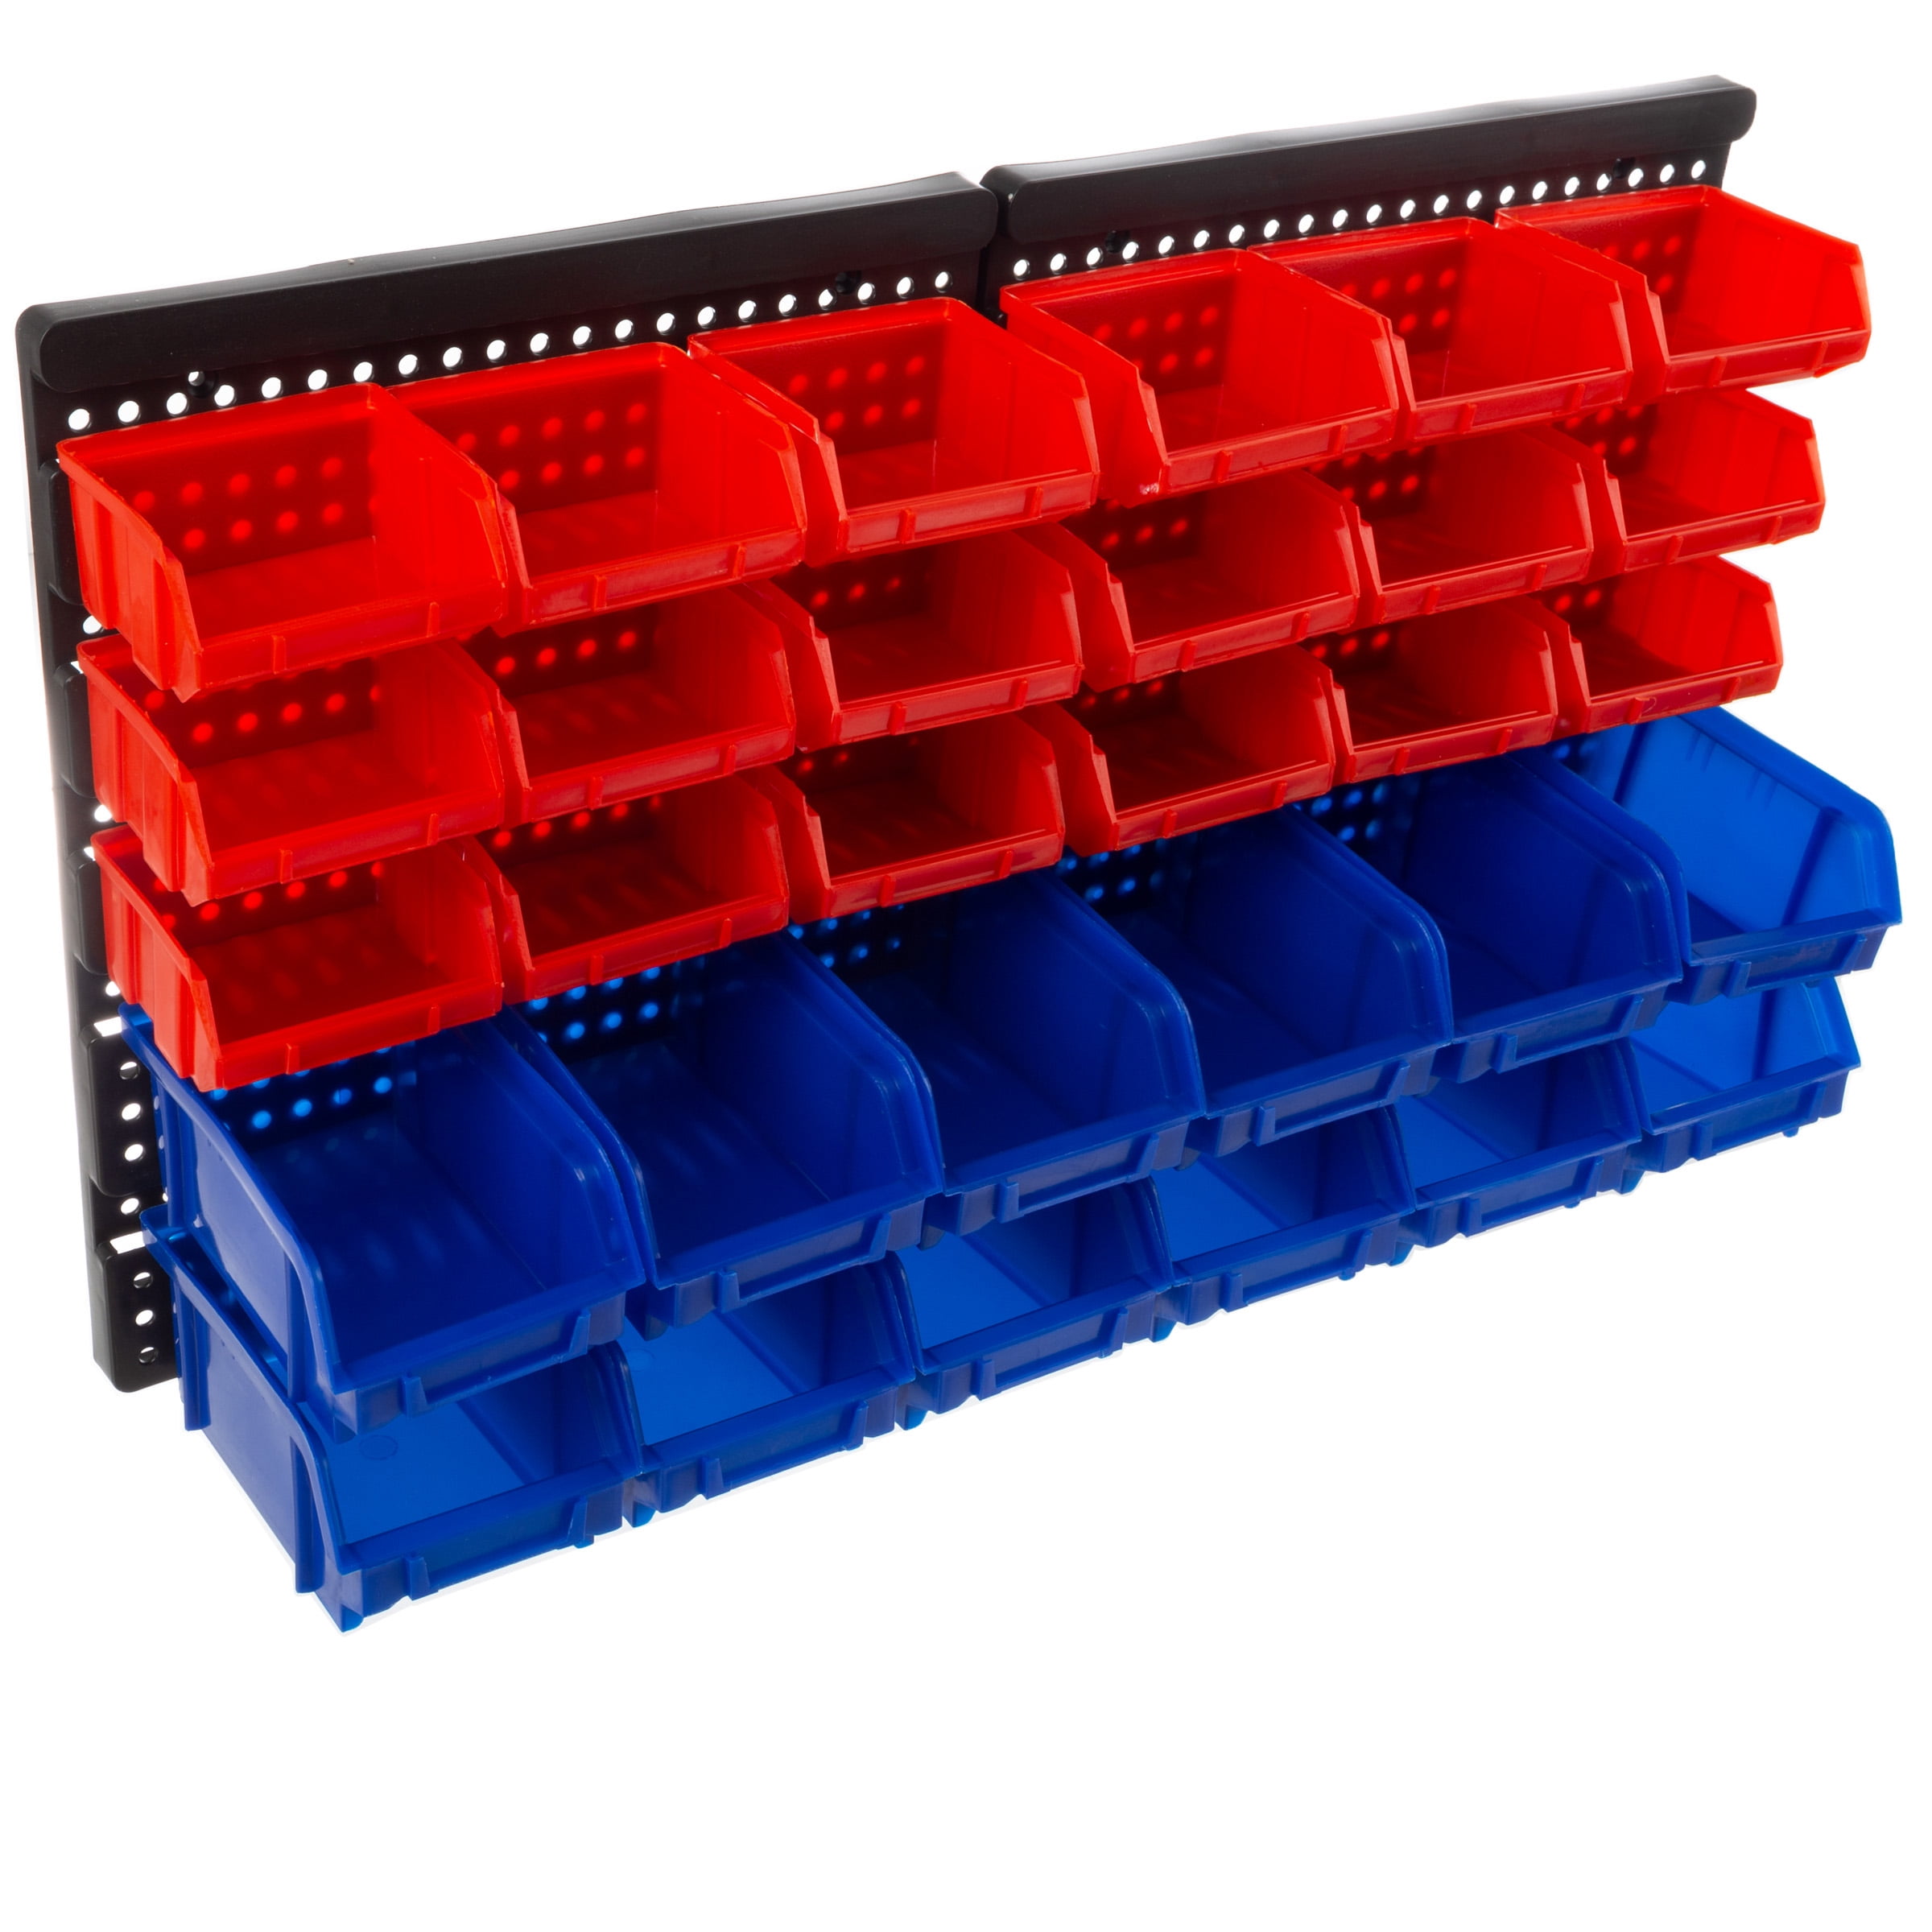 Akro-Mils 26 Drawer Plastic Storage Organizer with Drawers for Hardware,  Small Parts, Craft Supplies, Black 